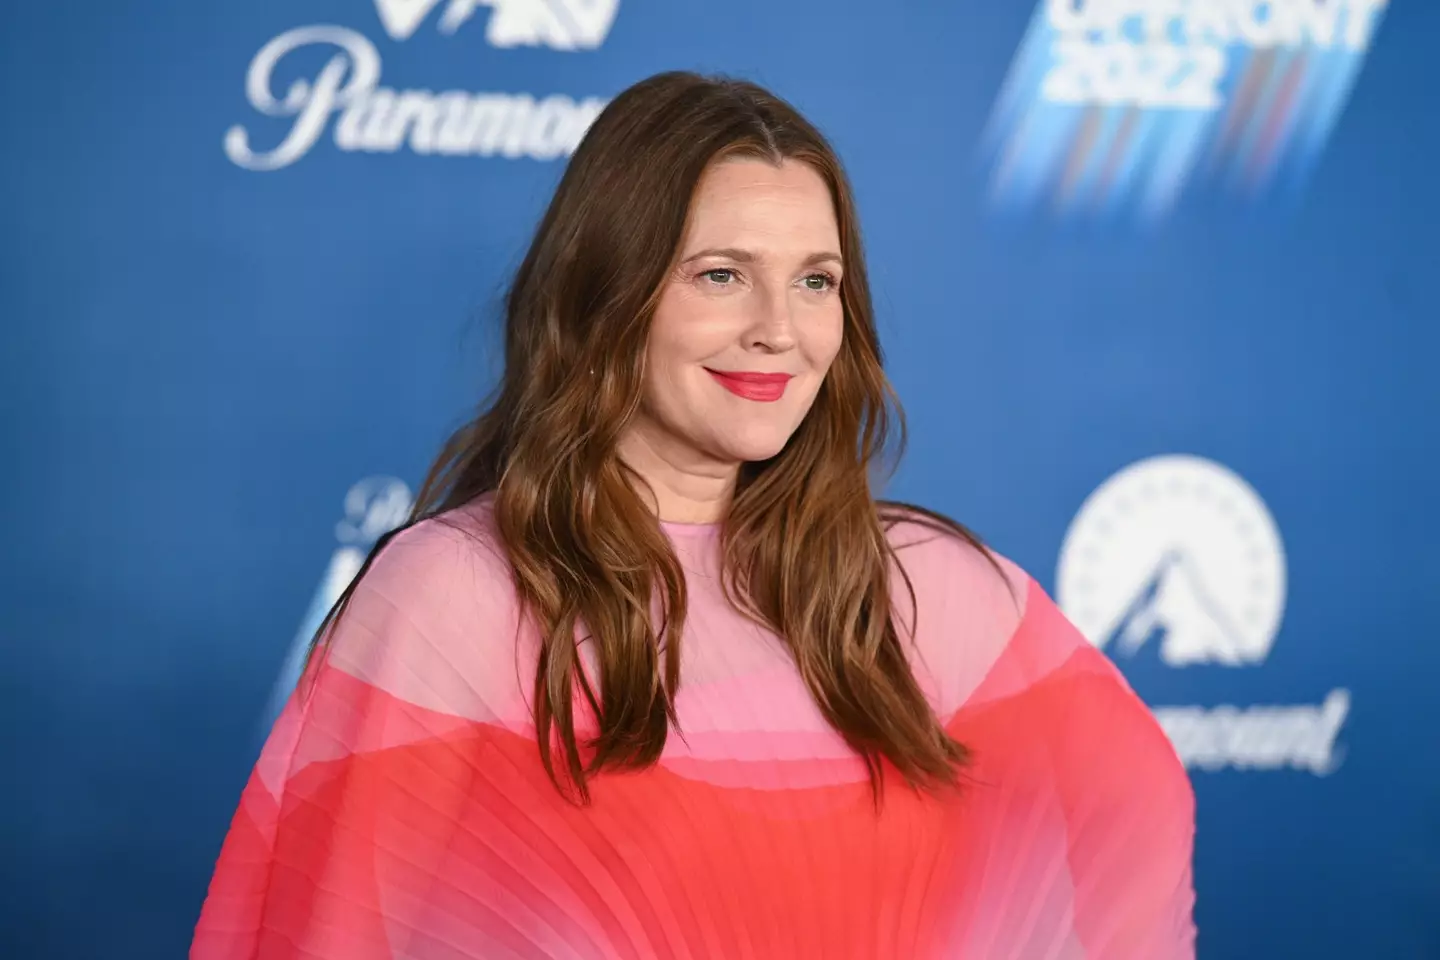 Drew Barrymore has opened up about her sex life.